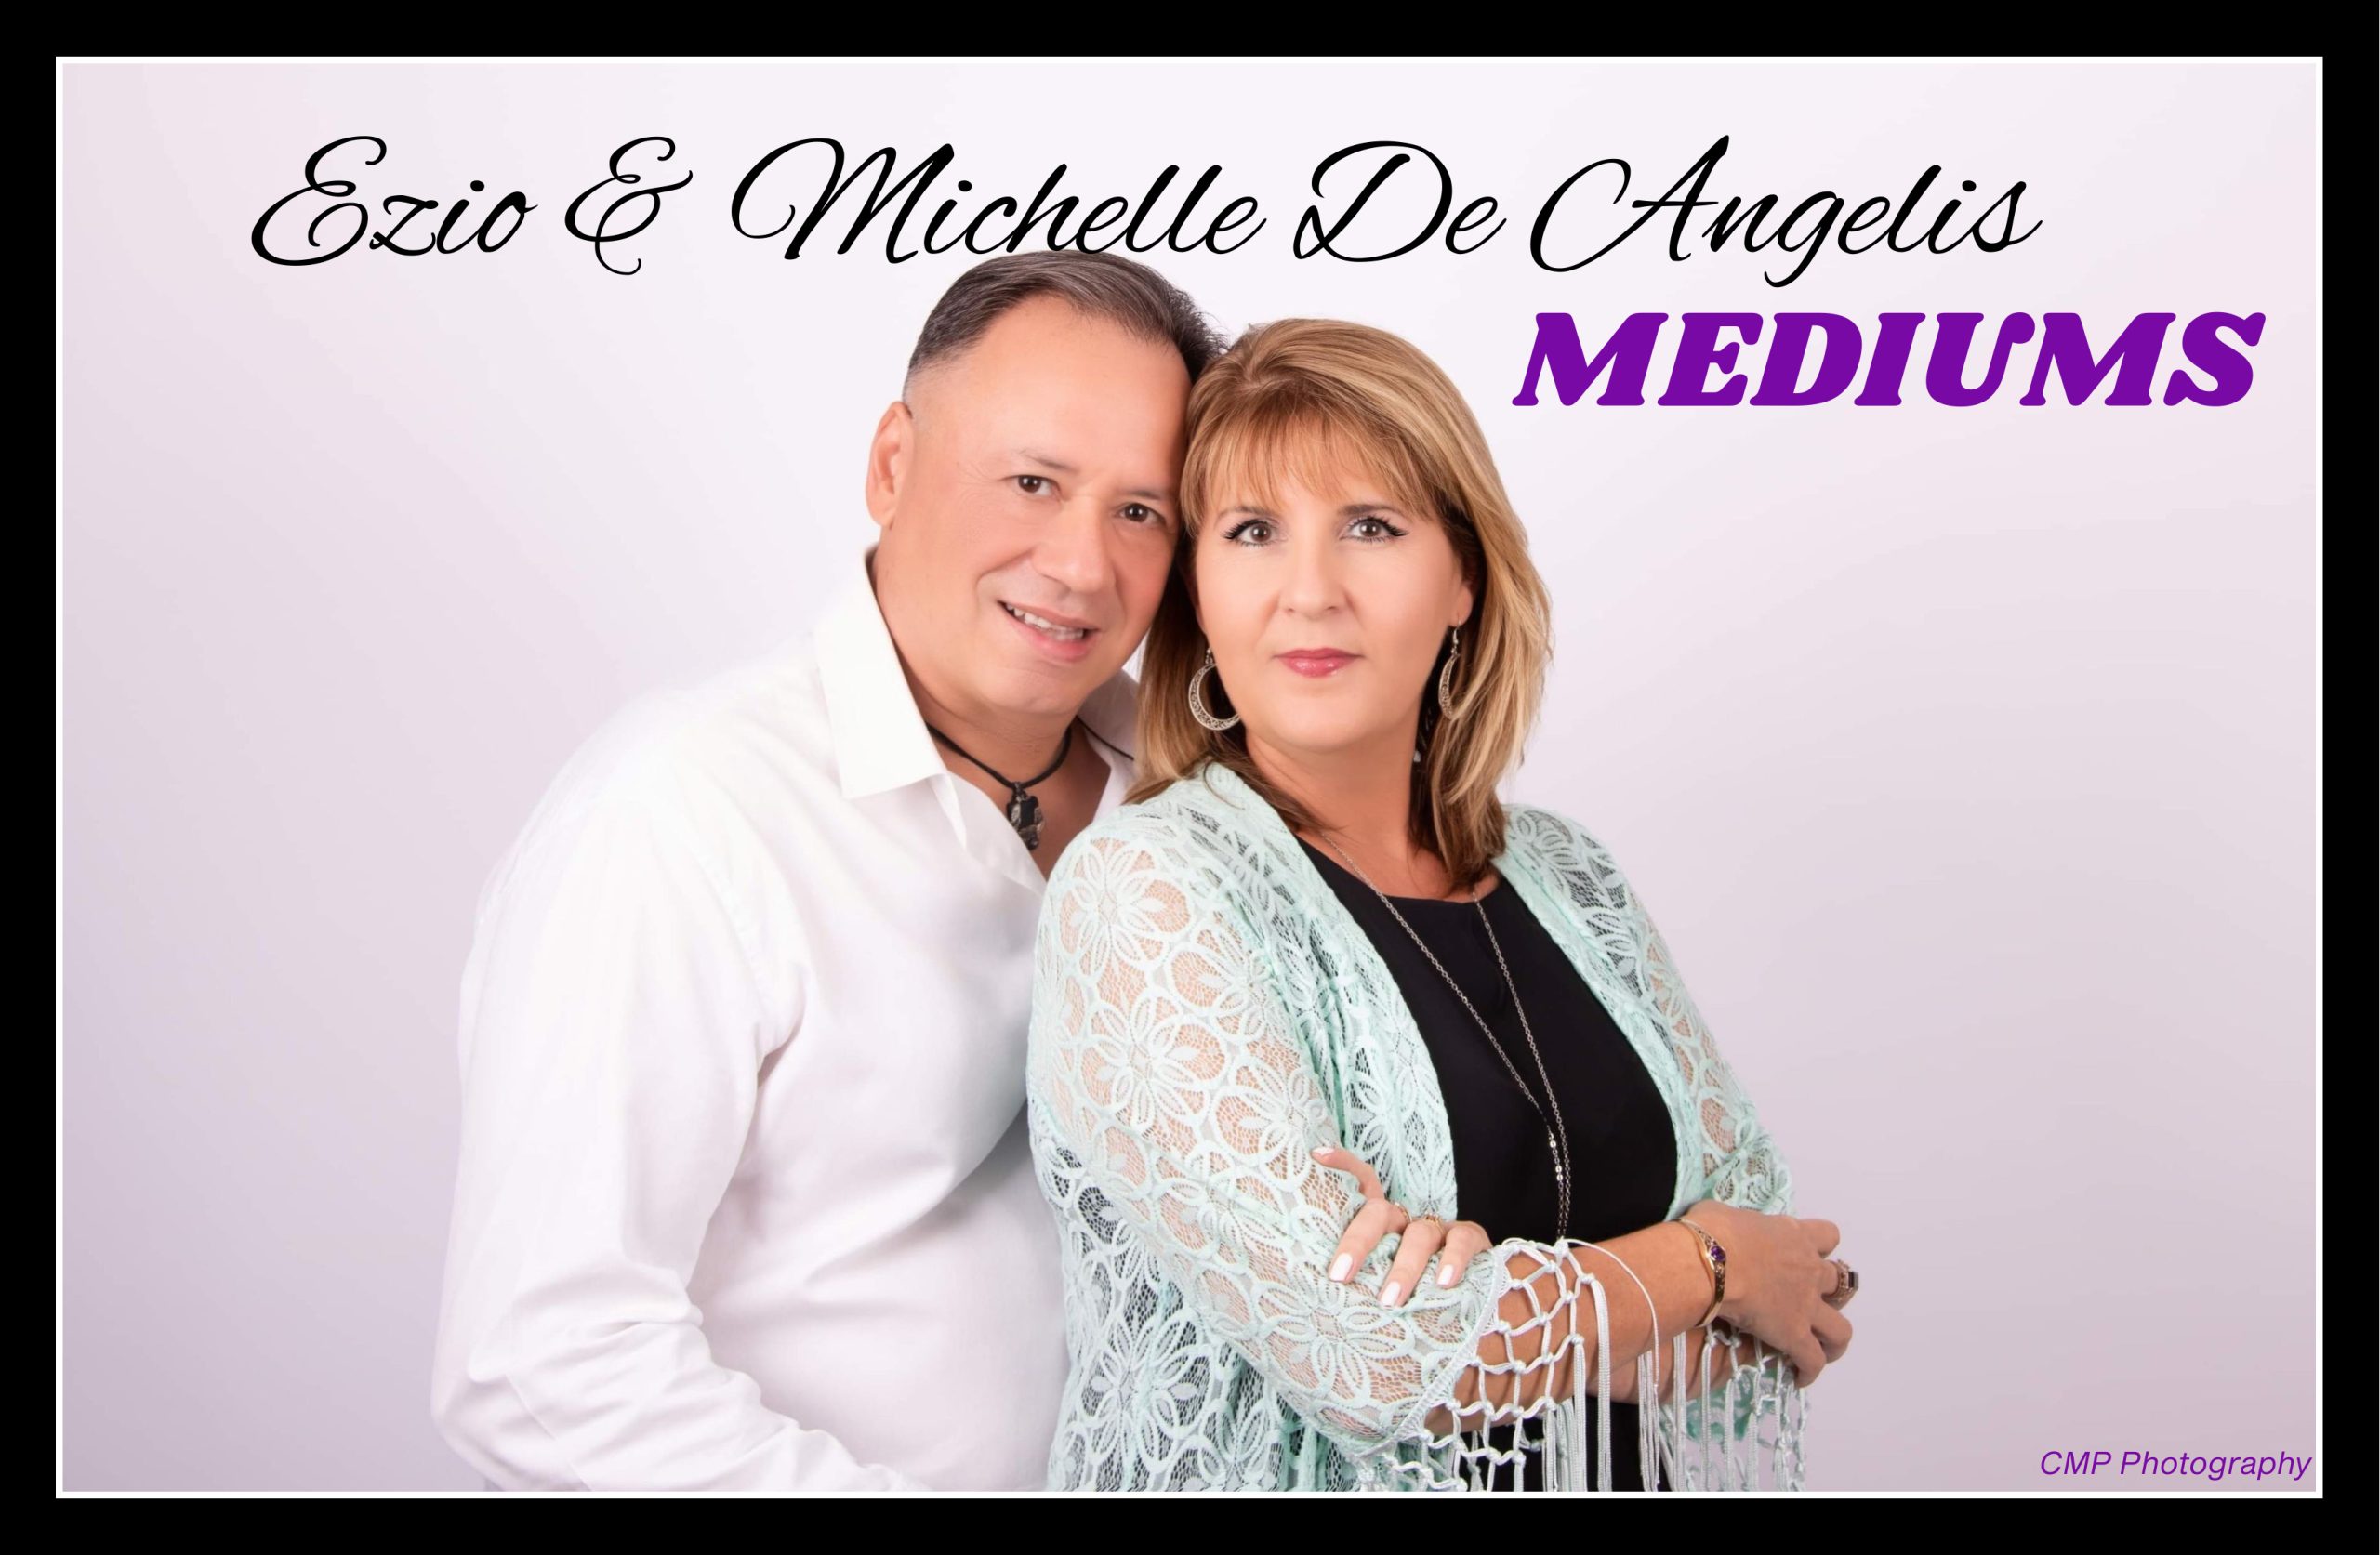 An evening of psychic and spiritual connections with Australia's number one psychic couple, Ezio and Michelle De Angelis at Panania Diggers.